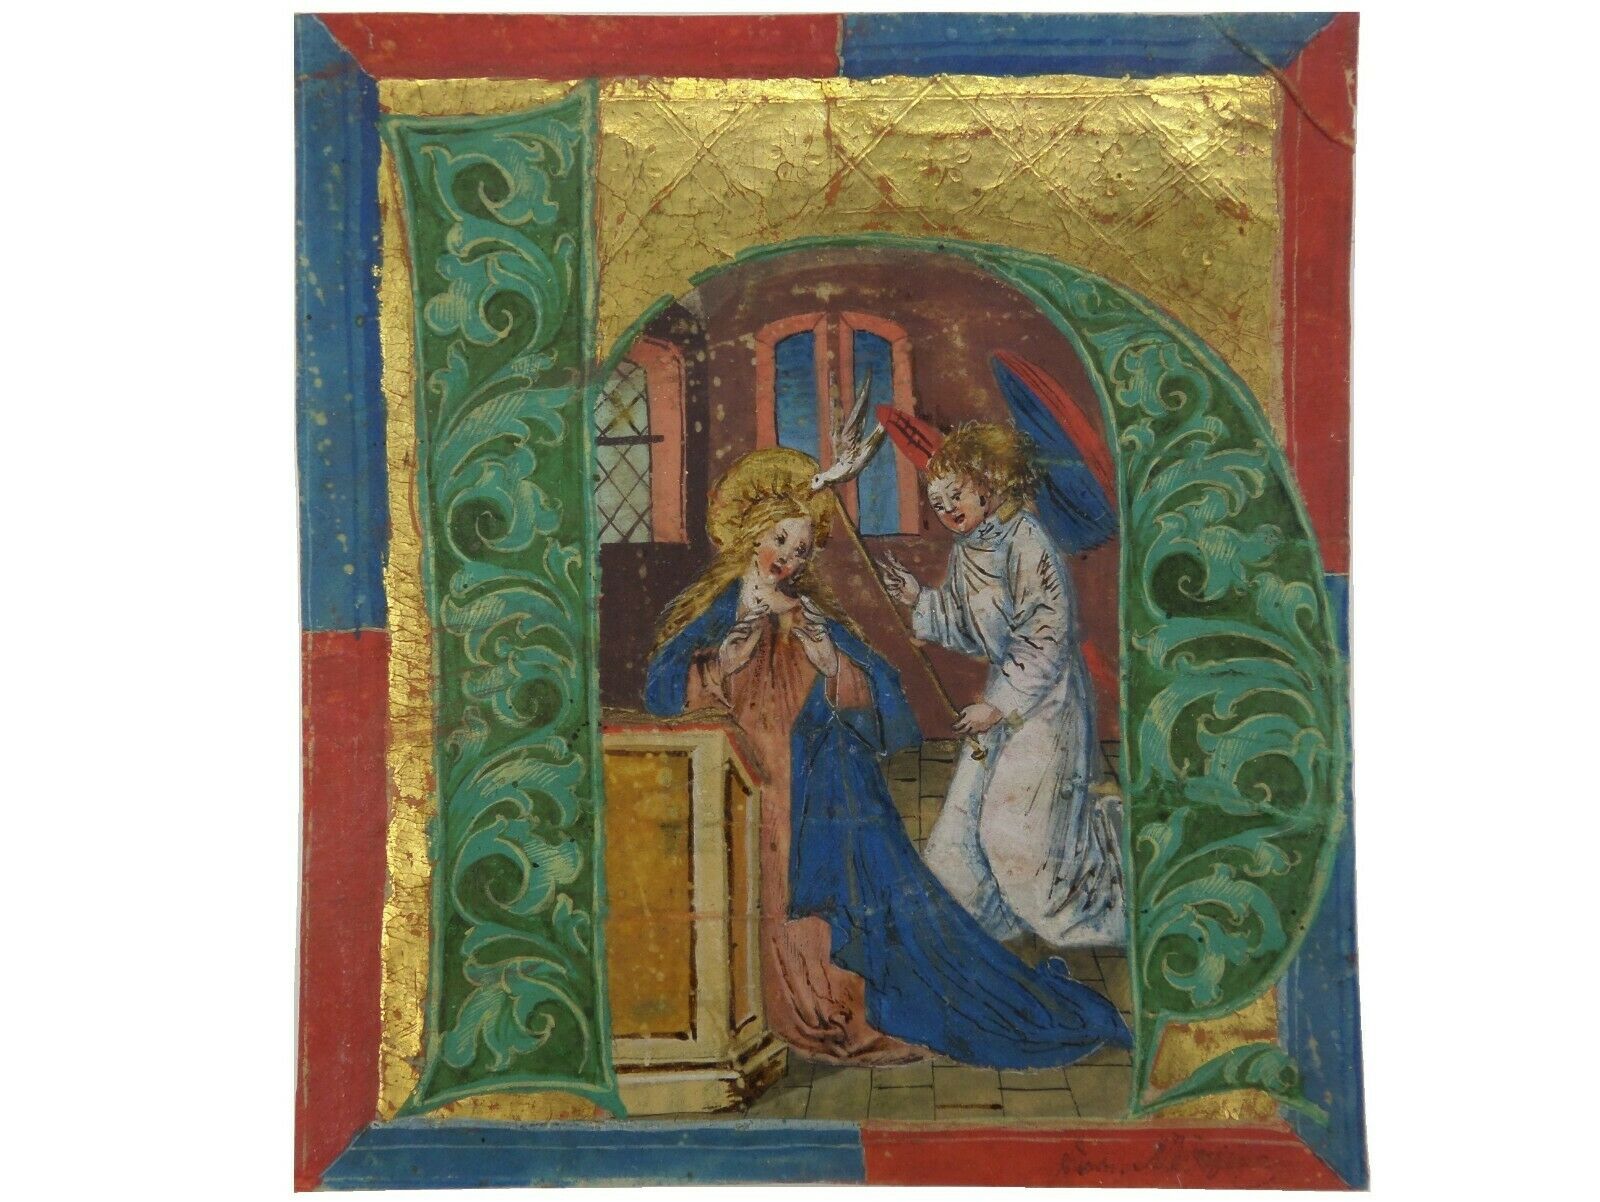 MEDIEVAL ANTIPHONER CHOIRBOOK ILLUMINATED INITIAL 'H' CA.1440 THE ANNUNCIATION